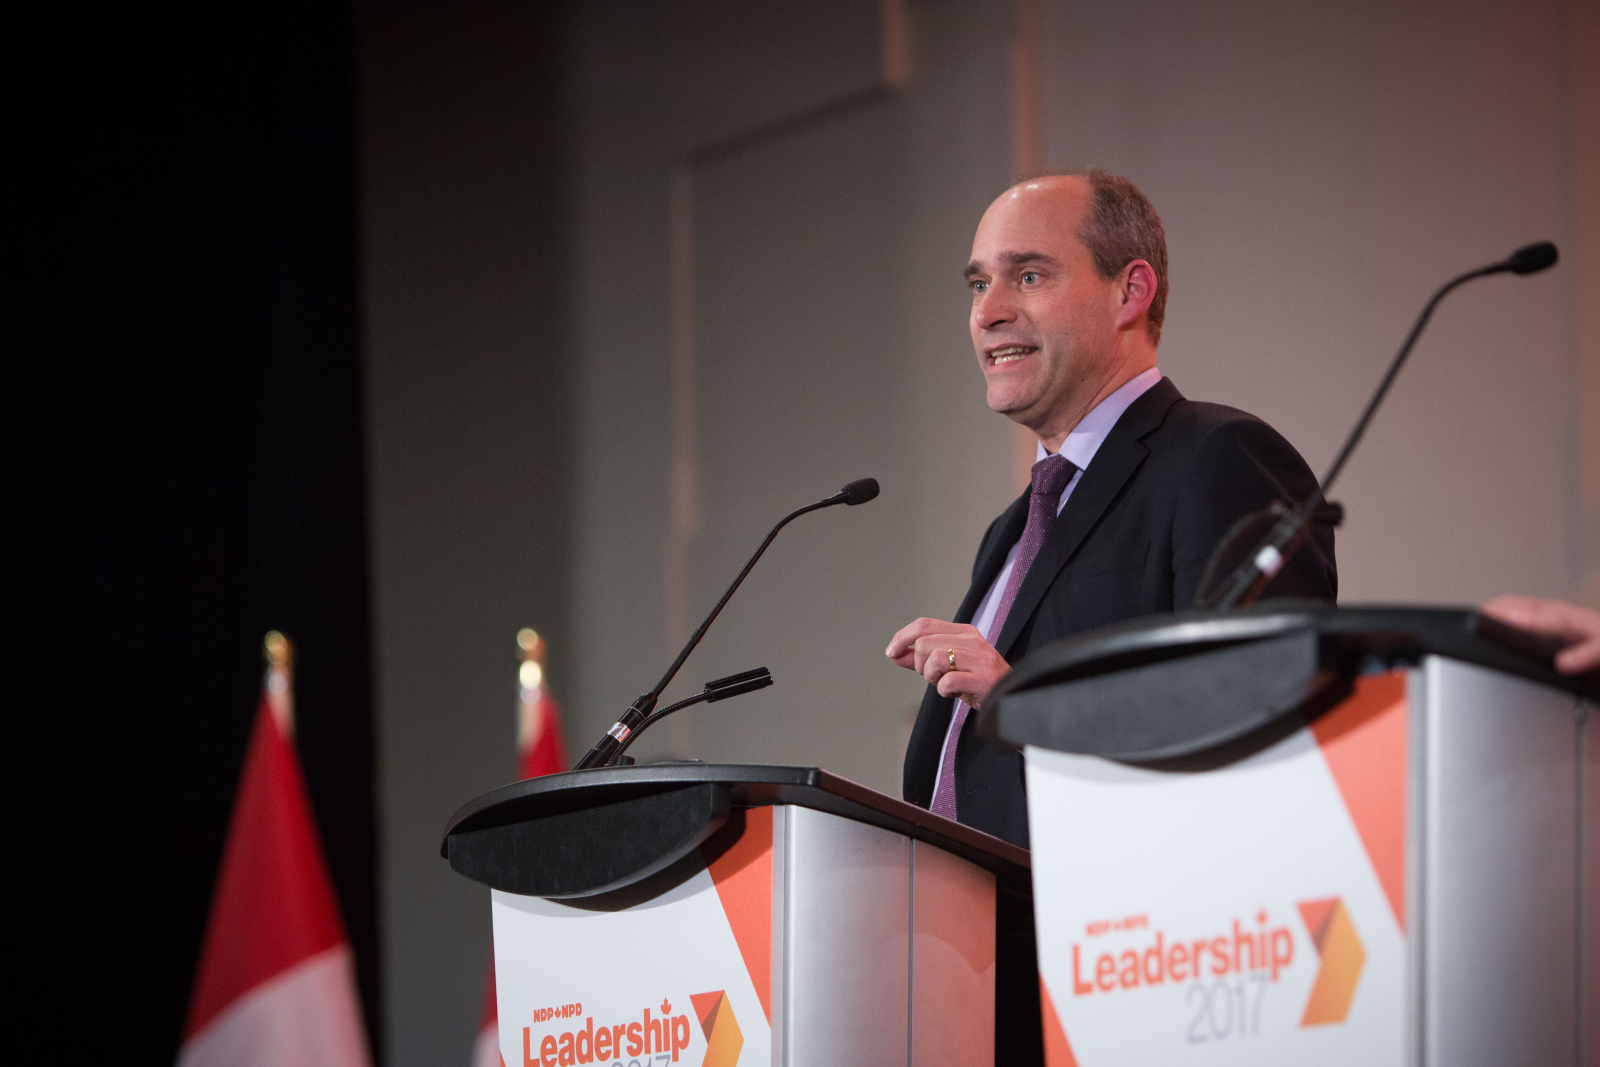 NDP MP Guy Caron is one of just a few of the party's MPs who held onto his seat in Quebec in 2015. Photo by Alex Tétreault.